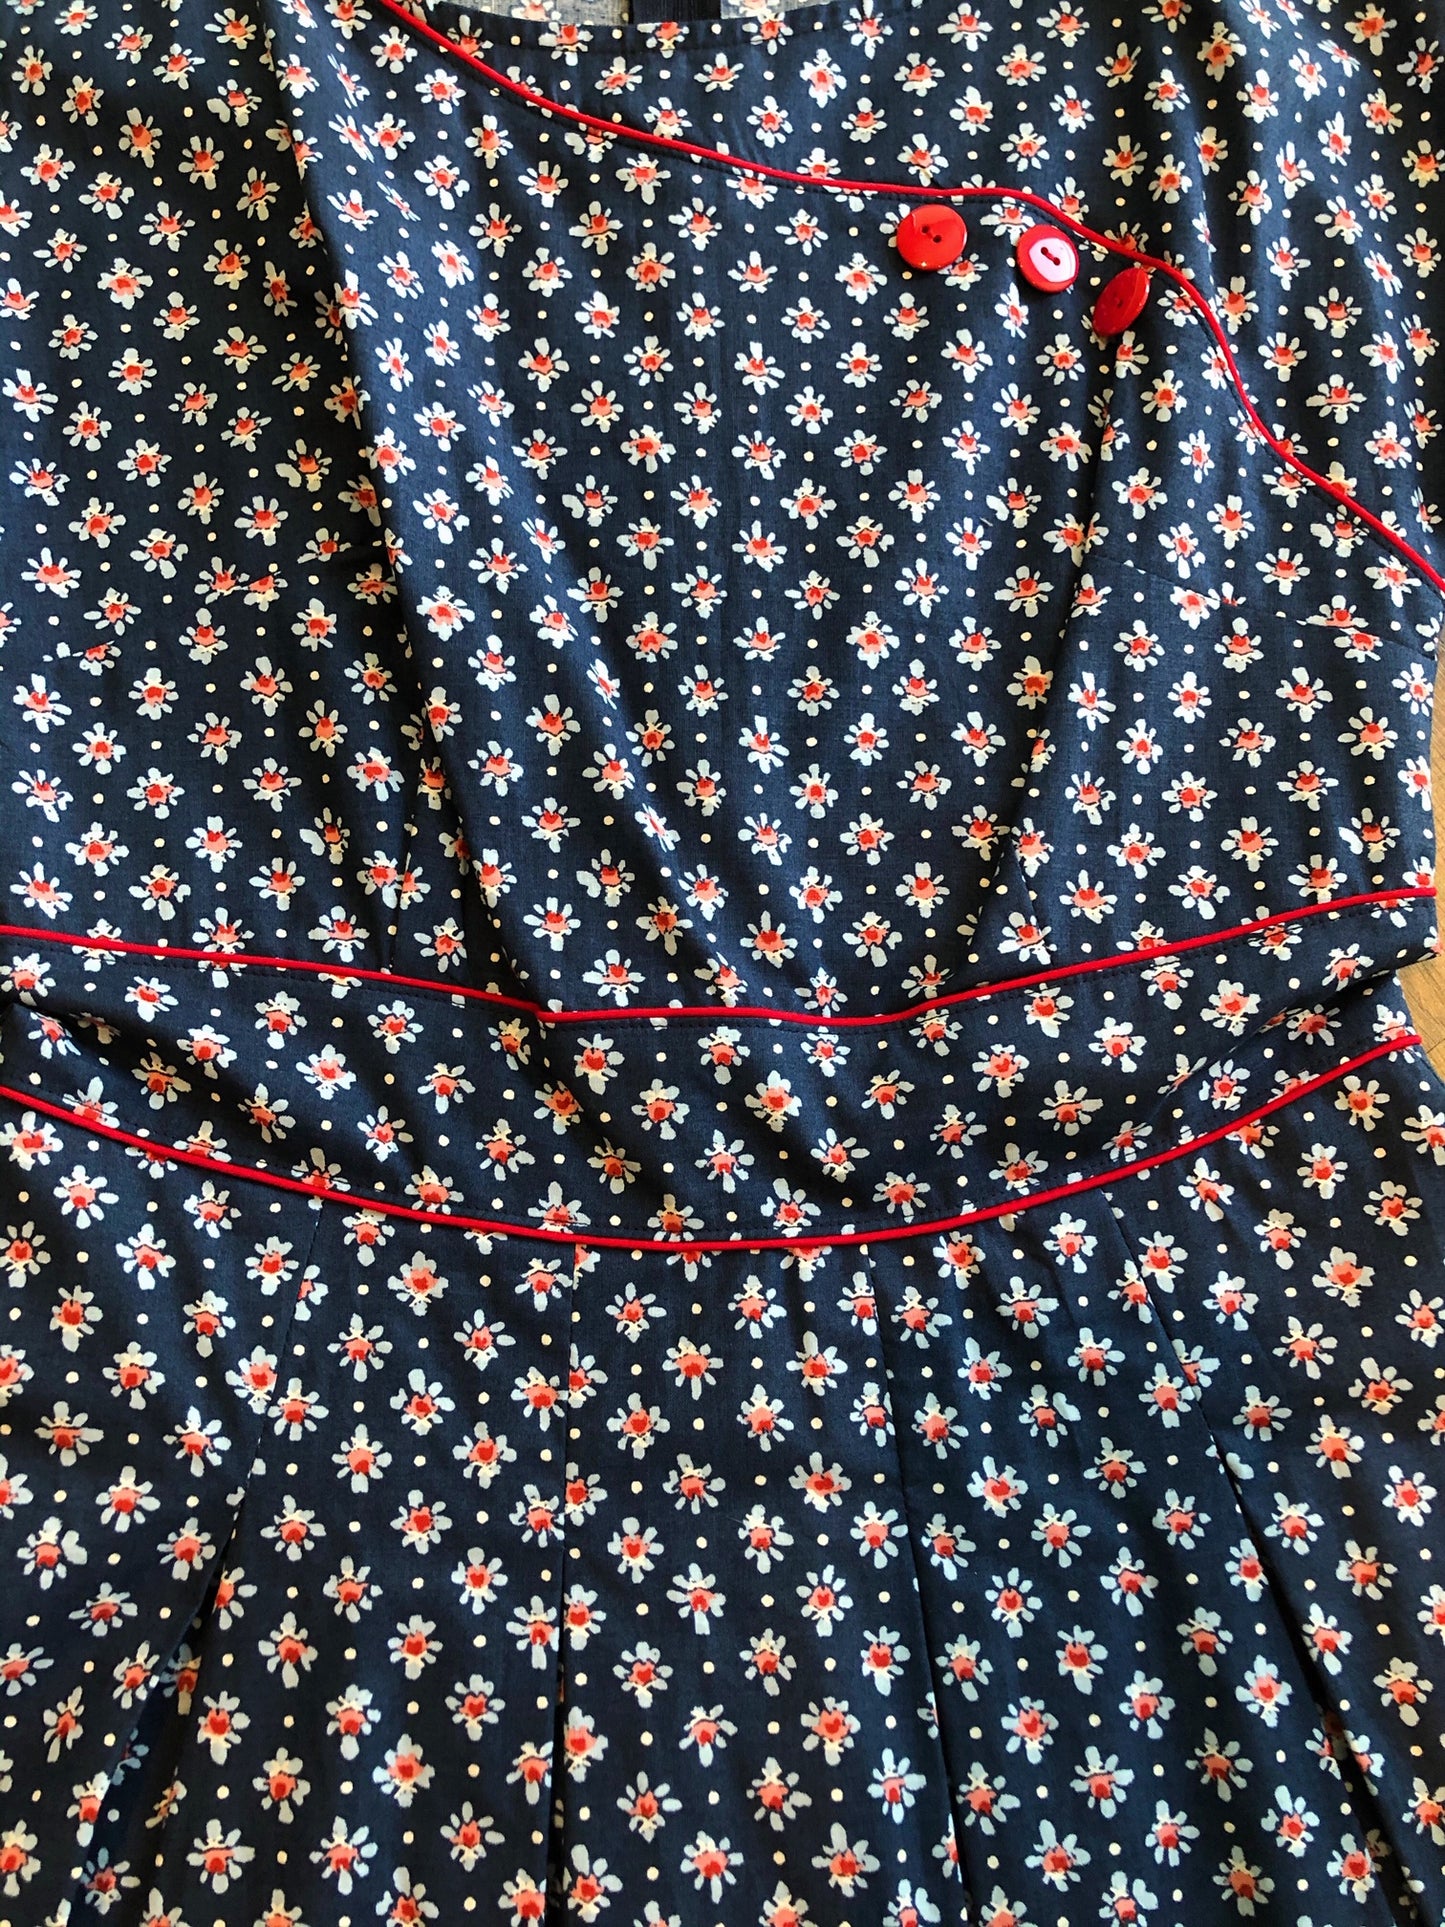 a close up showing the flower pattern on navy blue with red buttons and piping